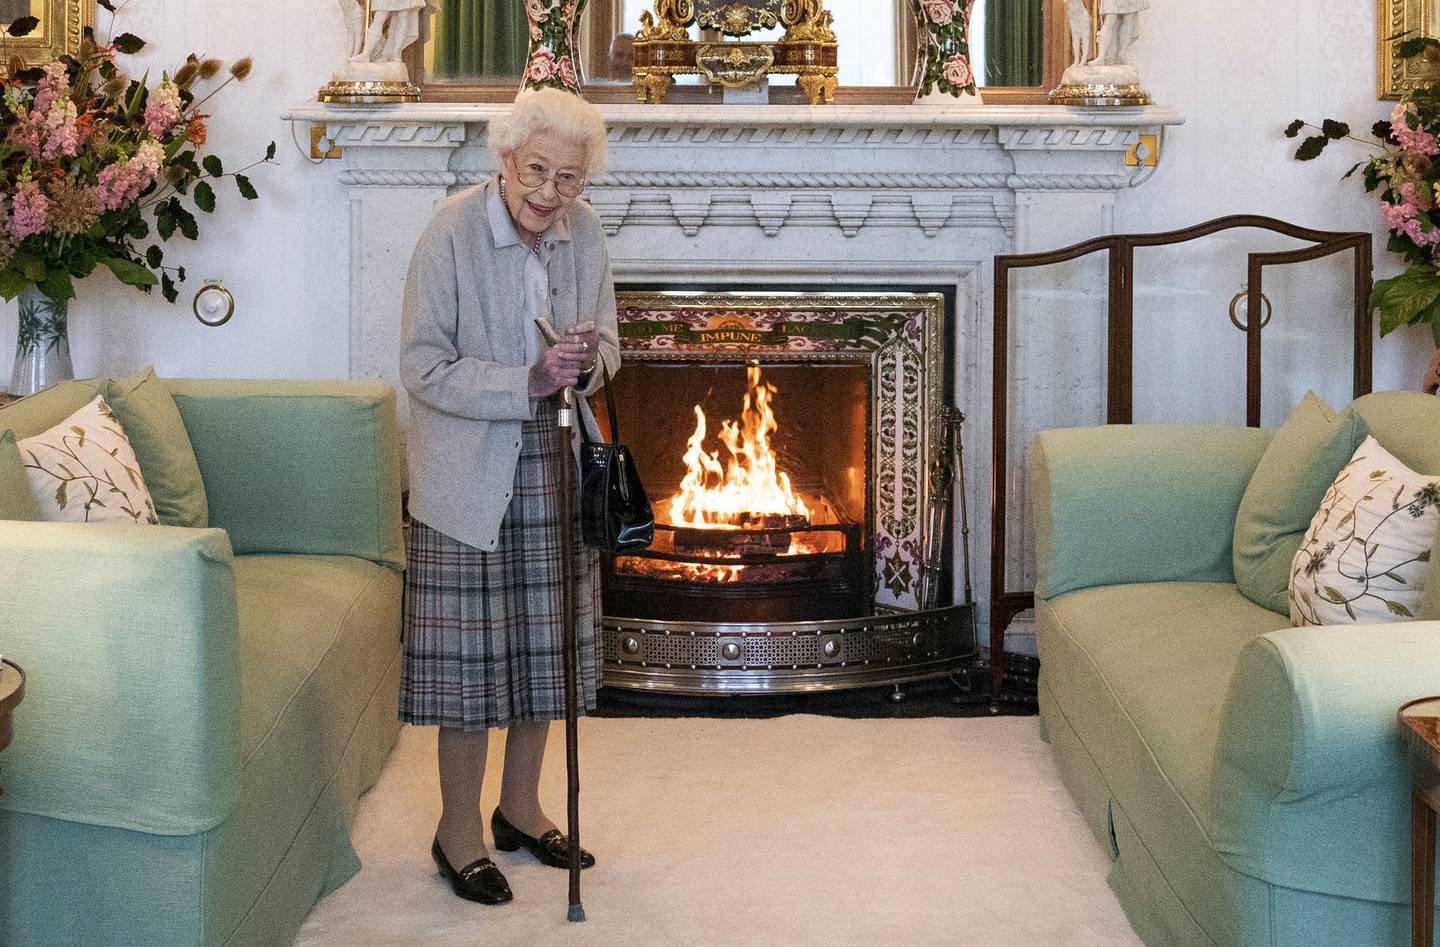 Britain's Queen Elizabeth II waits in the Drawing Room before receiving Liz Truss for an audience at Balmoral, in Scotland, Tuesday, Sept. 6, 2022, where Truss was invited to become Prime Minister and form a new government. Buckingham Palace says Queen Elizabeth II is under medical supervision as doctors are “concerned for Her Majesty’s health.” The announcement comes a day after the 96-year-old monarch canceled a meeting of her Privy Council and was told to rest.